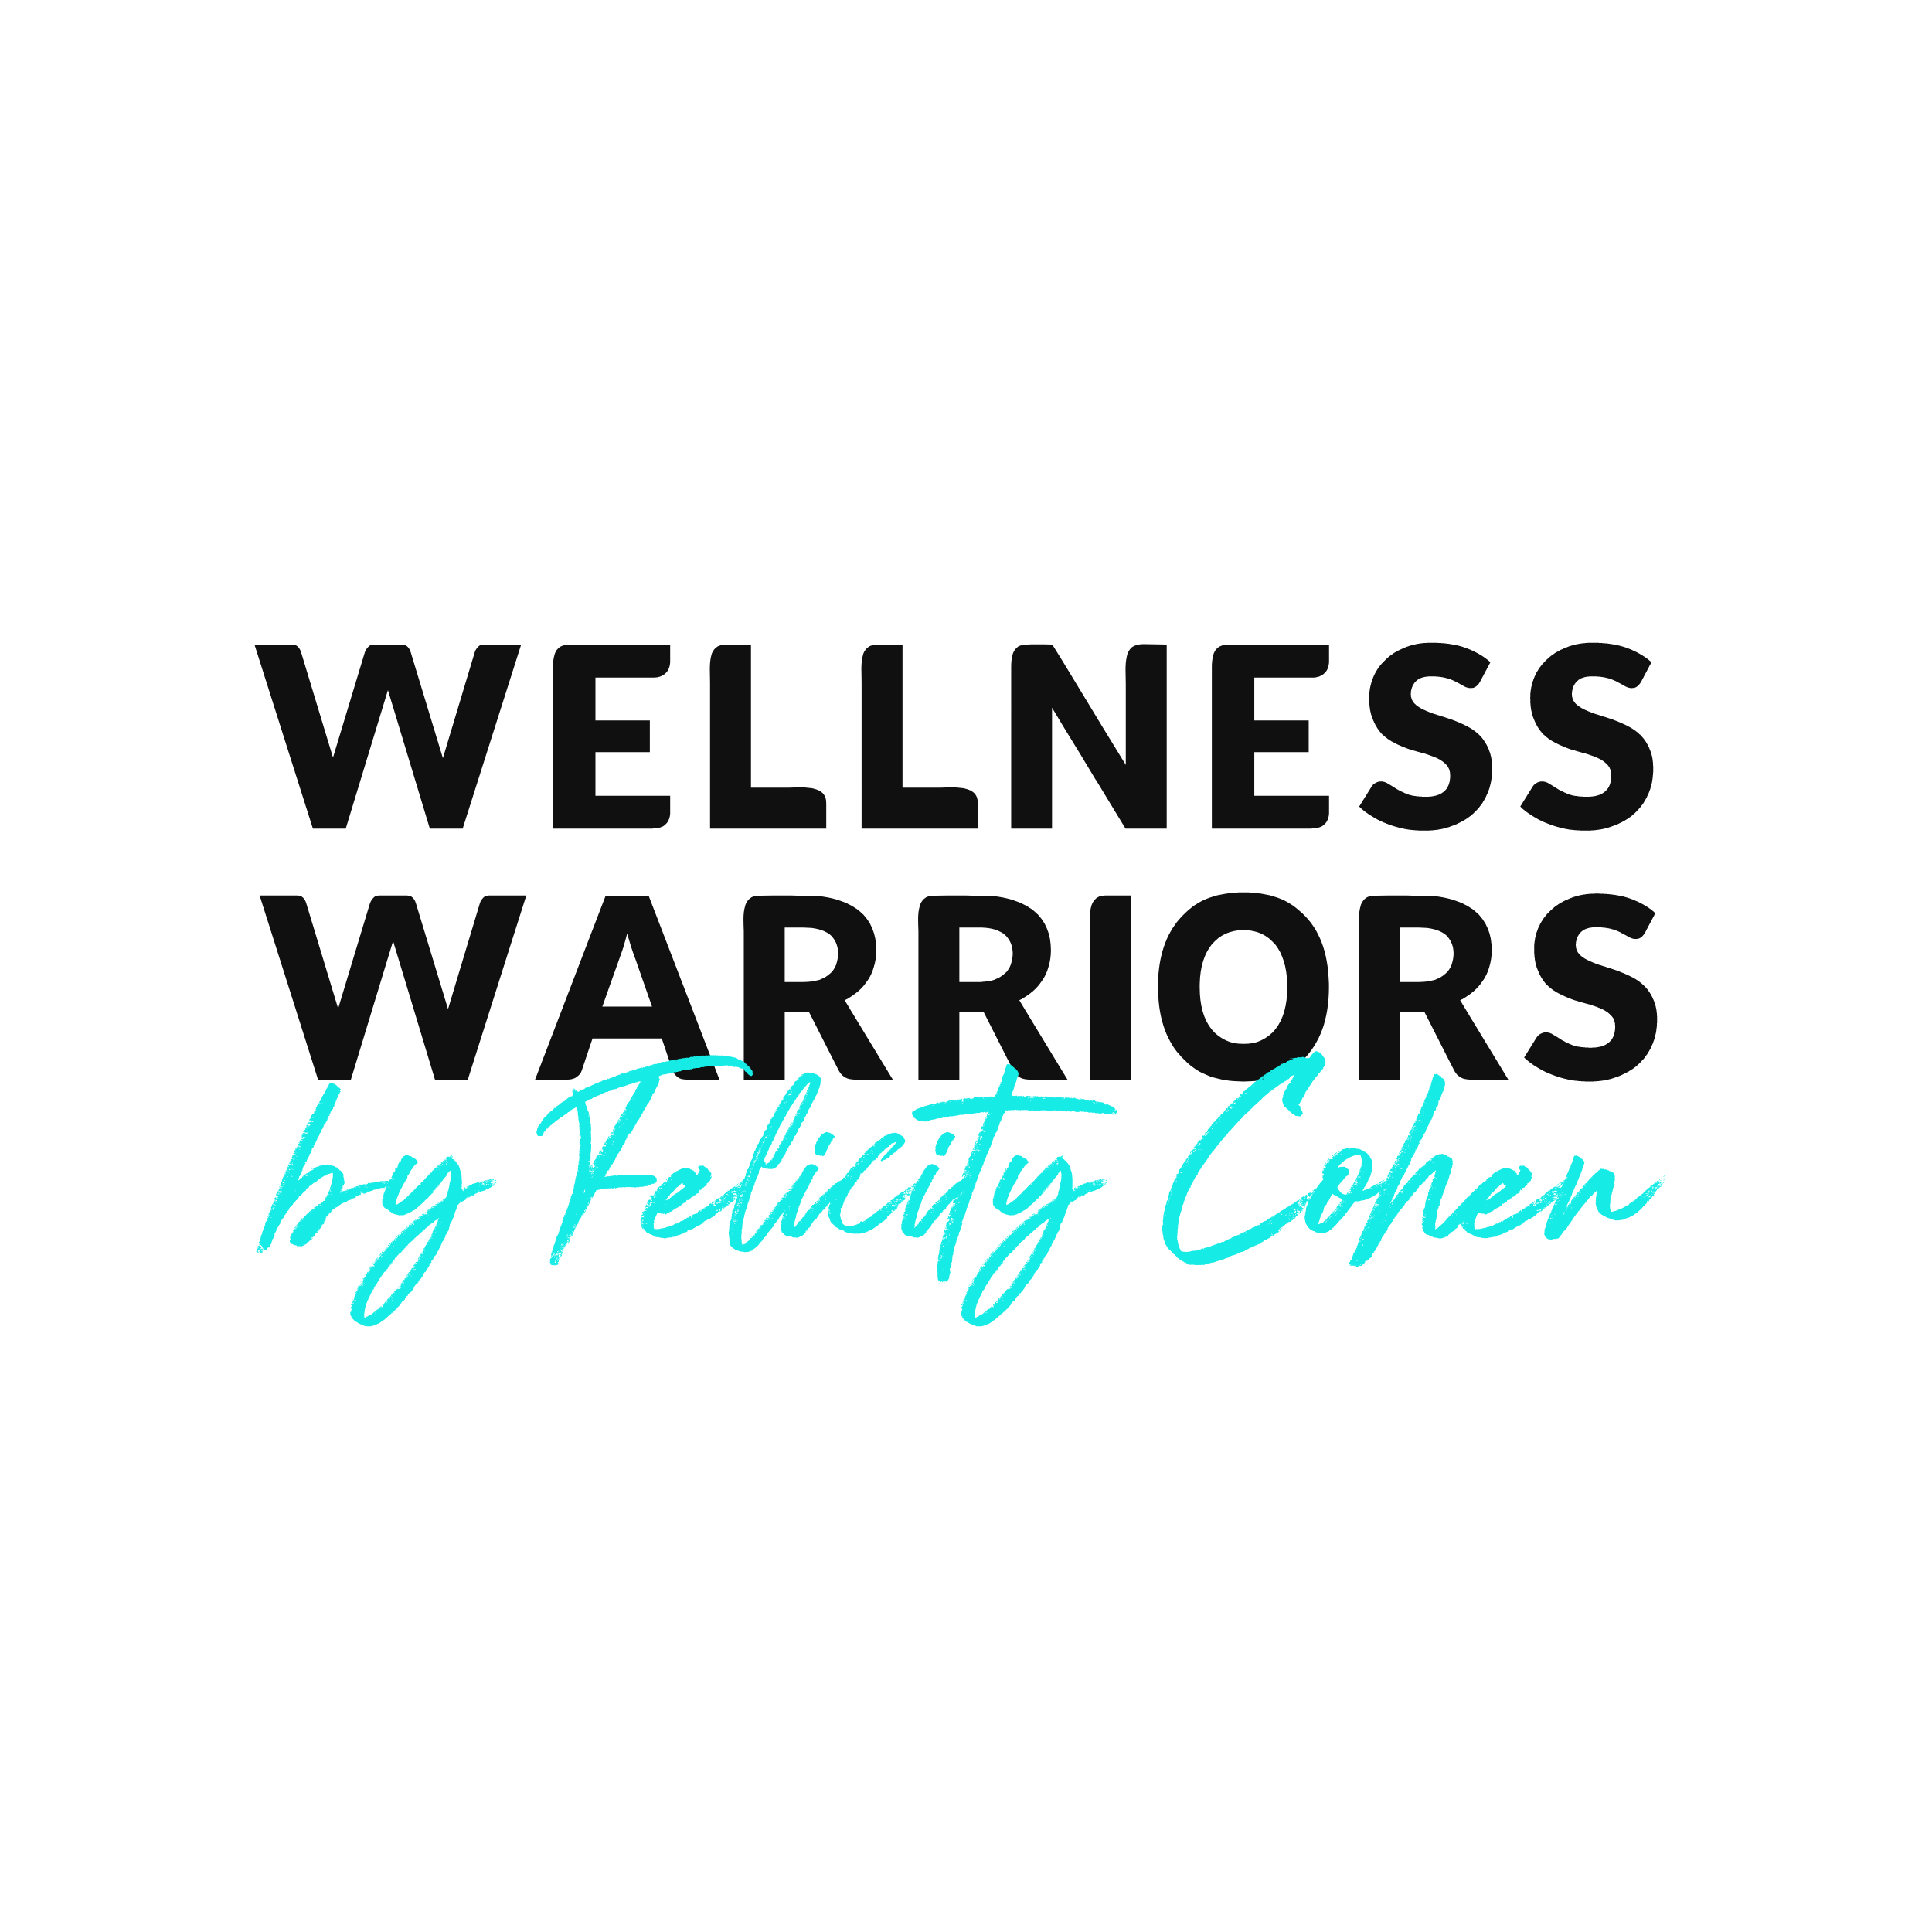 You are currently viewing Wellness Warriors